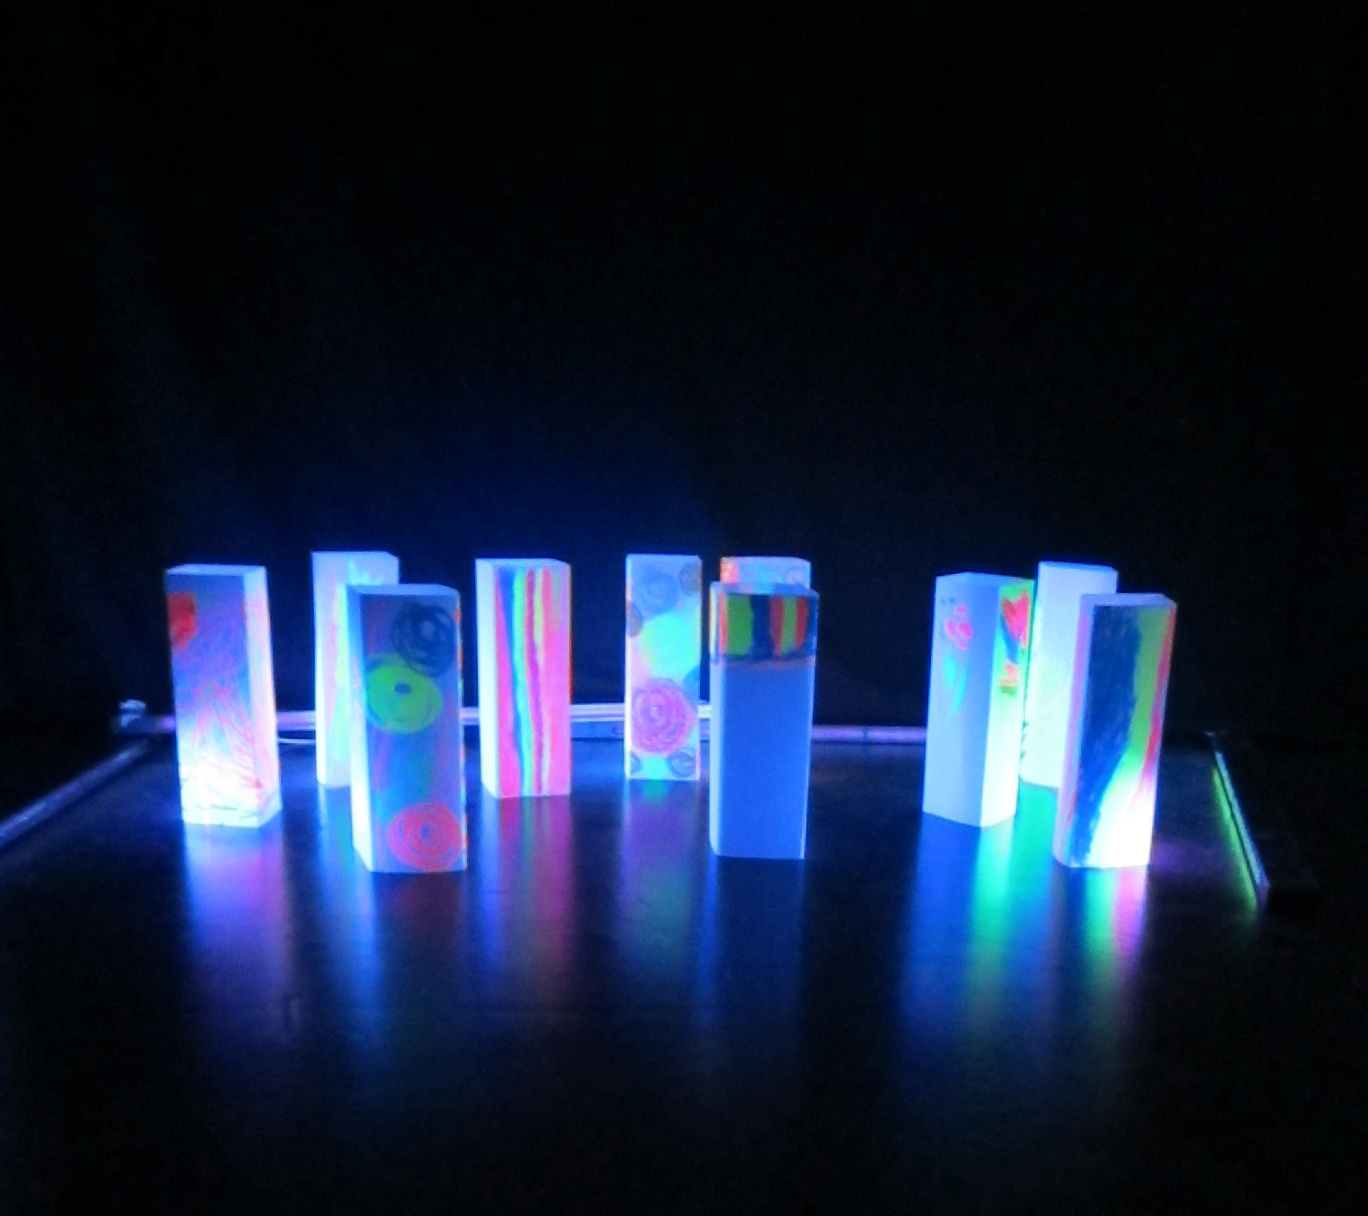 Numerous, with bright colors painted blocks are glowing in the neonlight. They stand in front of a black background and resemble a skyline.